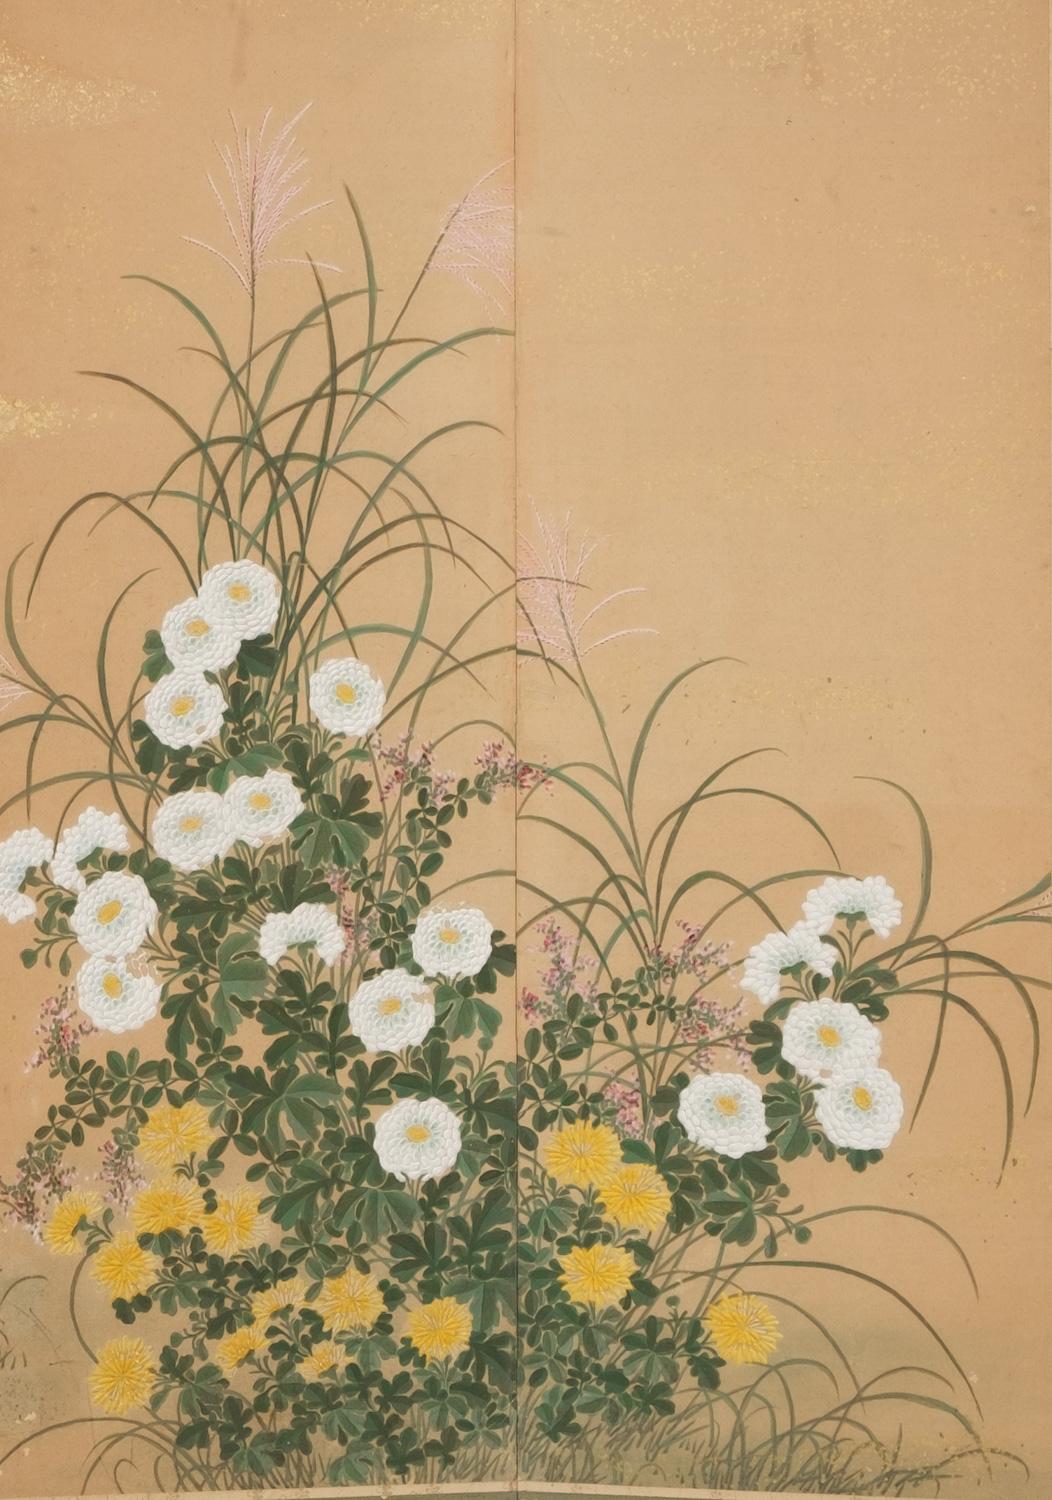 A delightful medium-size six-panel byôbu (folding screen) with a polychrome painting of puppies amidst a luscious flower garden. 
Various chrysanthemum flowers (kiku) in white, yellow-brown, pink. Surrounded by pampas grasses (susuki), blue morning